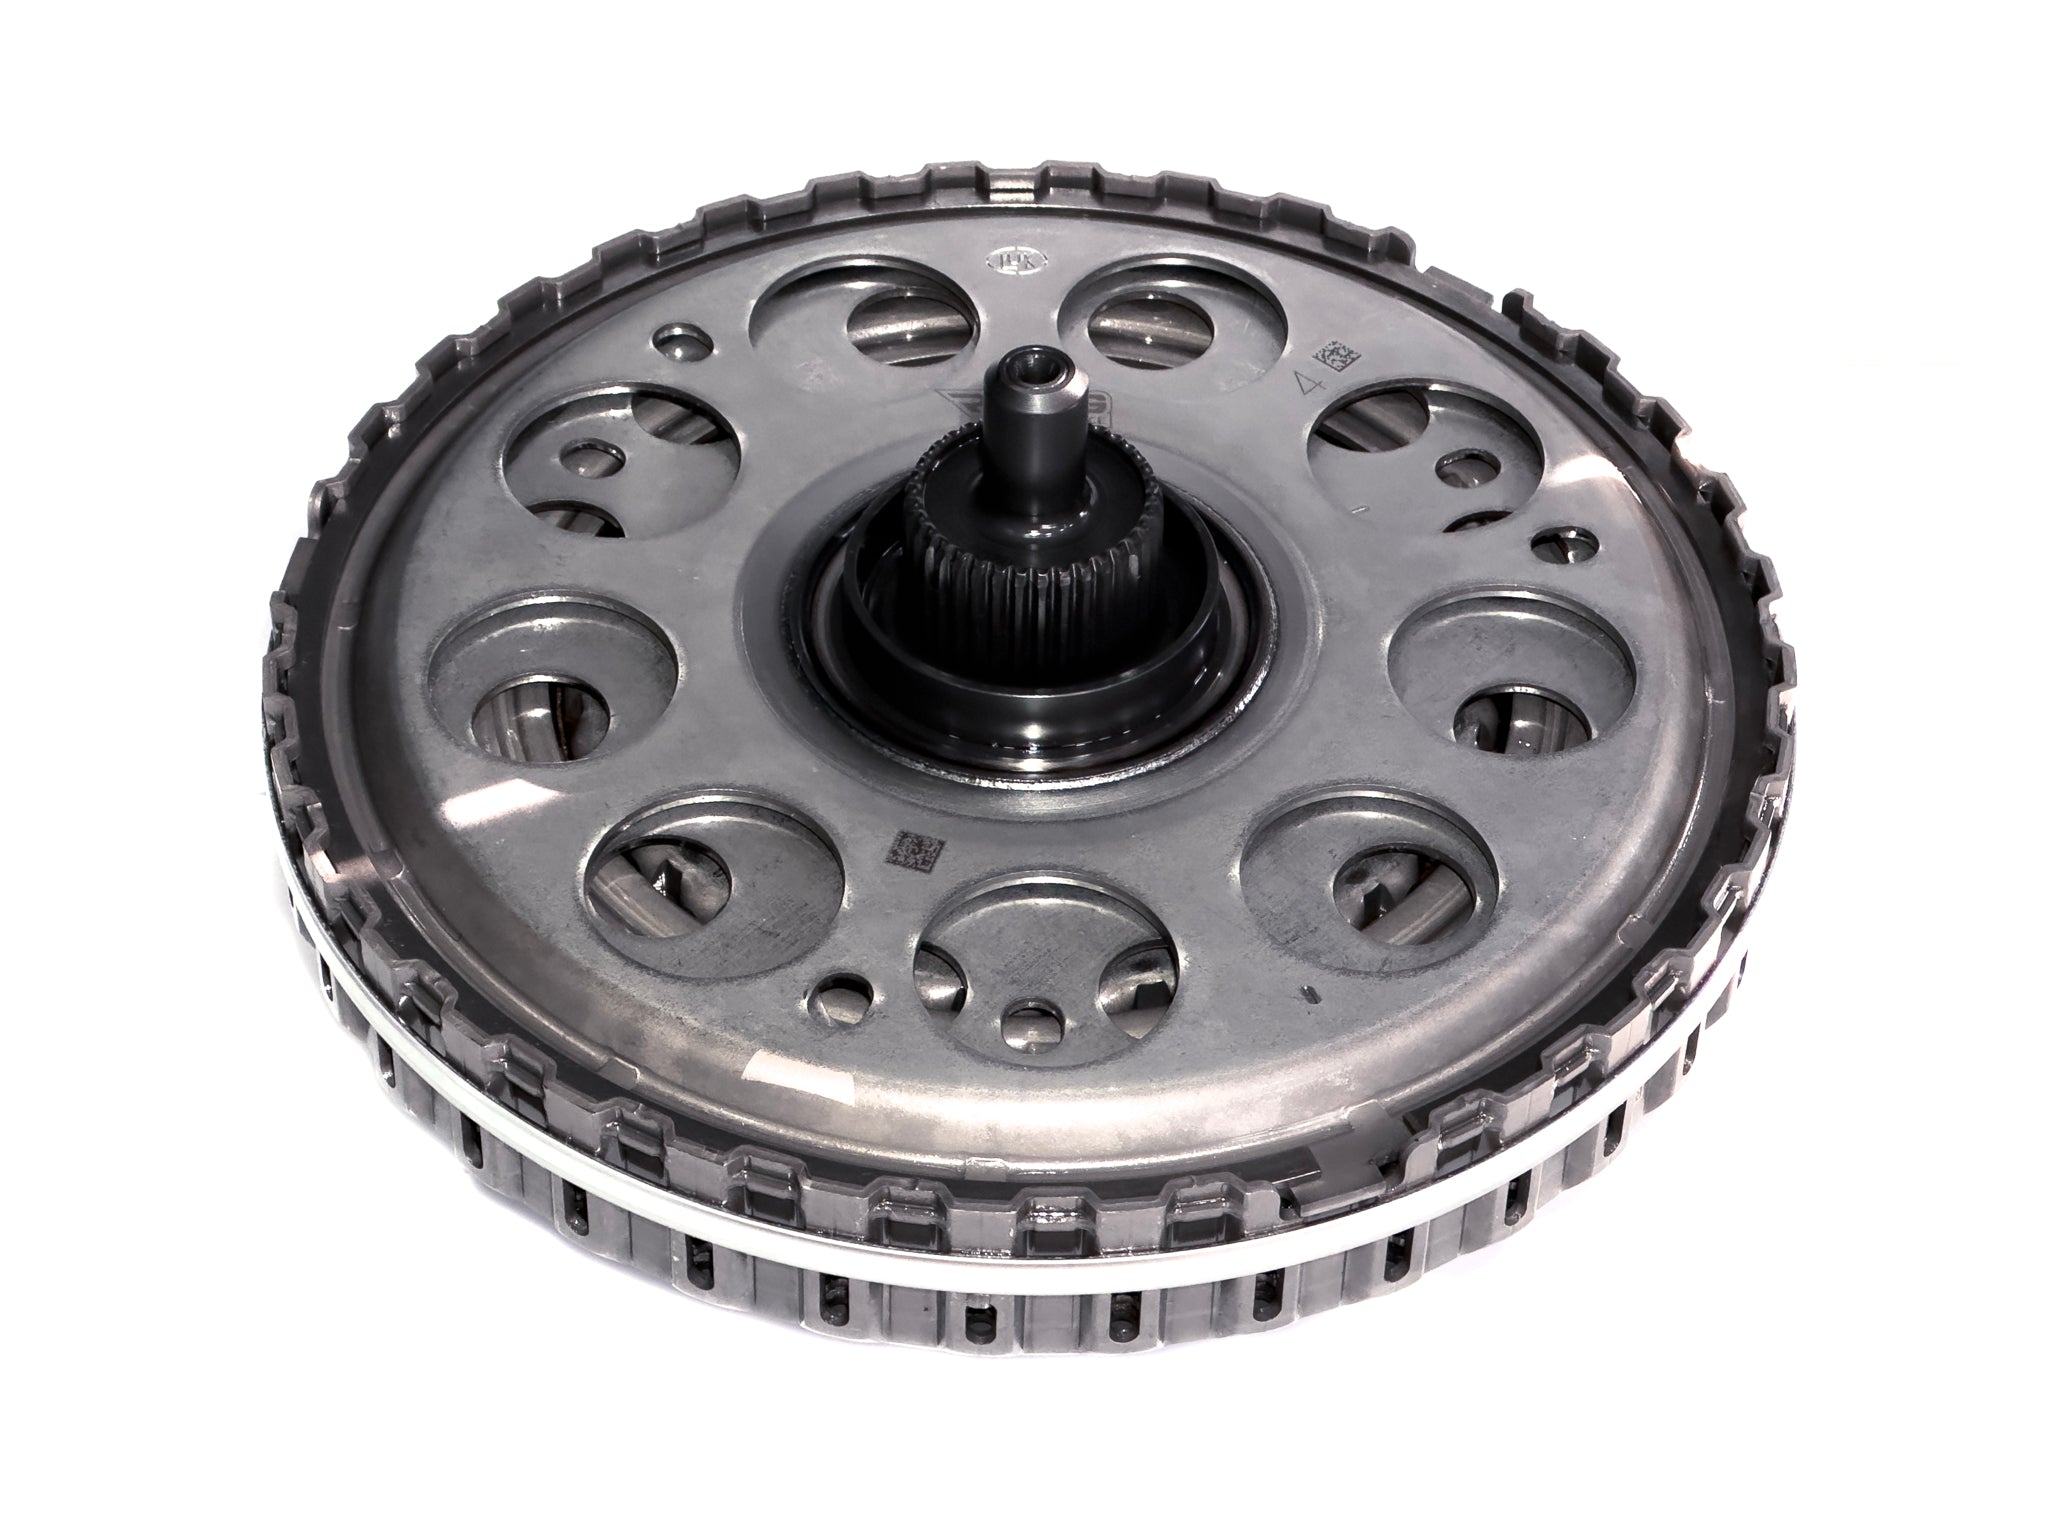 DSG DQ381 (0DW) - Upgraded Clutch up to 25% more torque handling - RTMG Performance